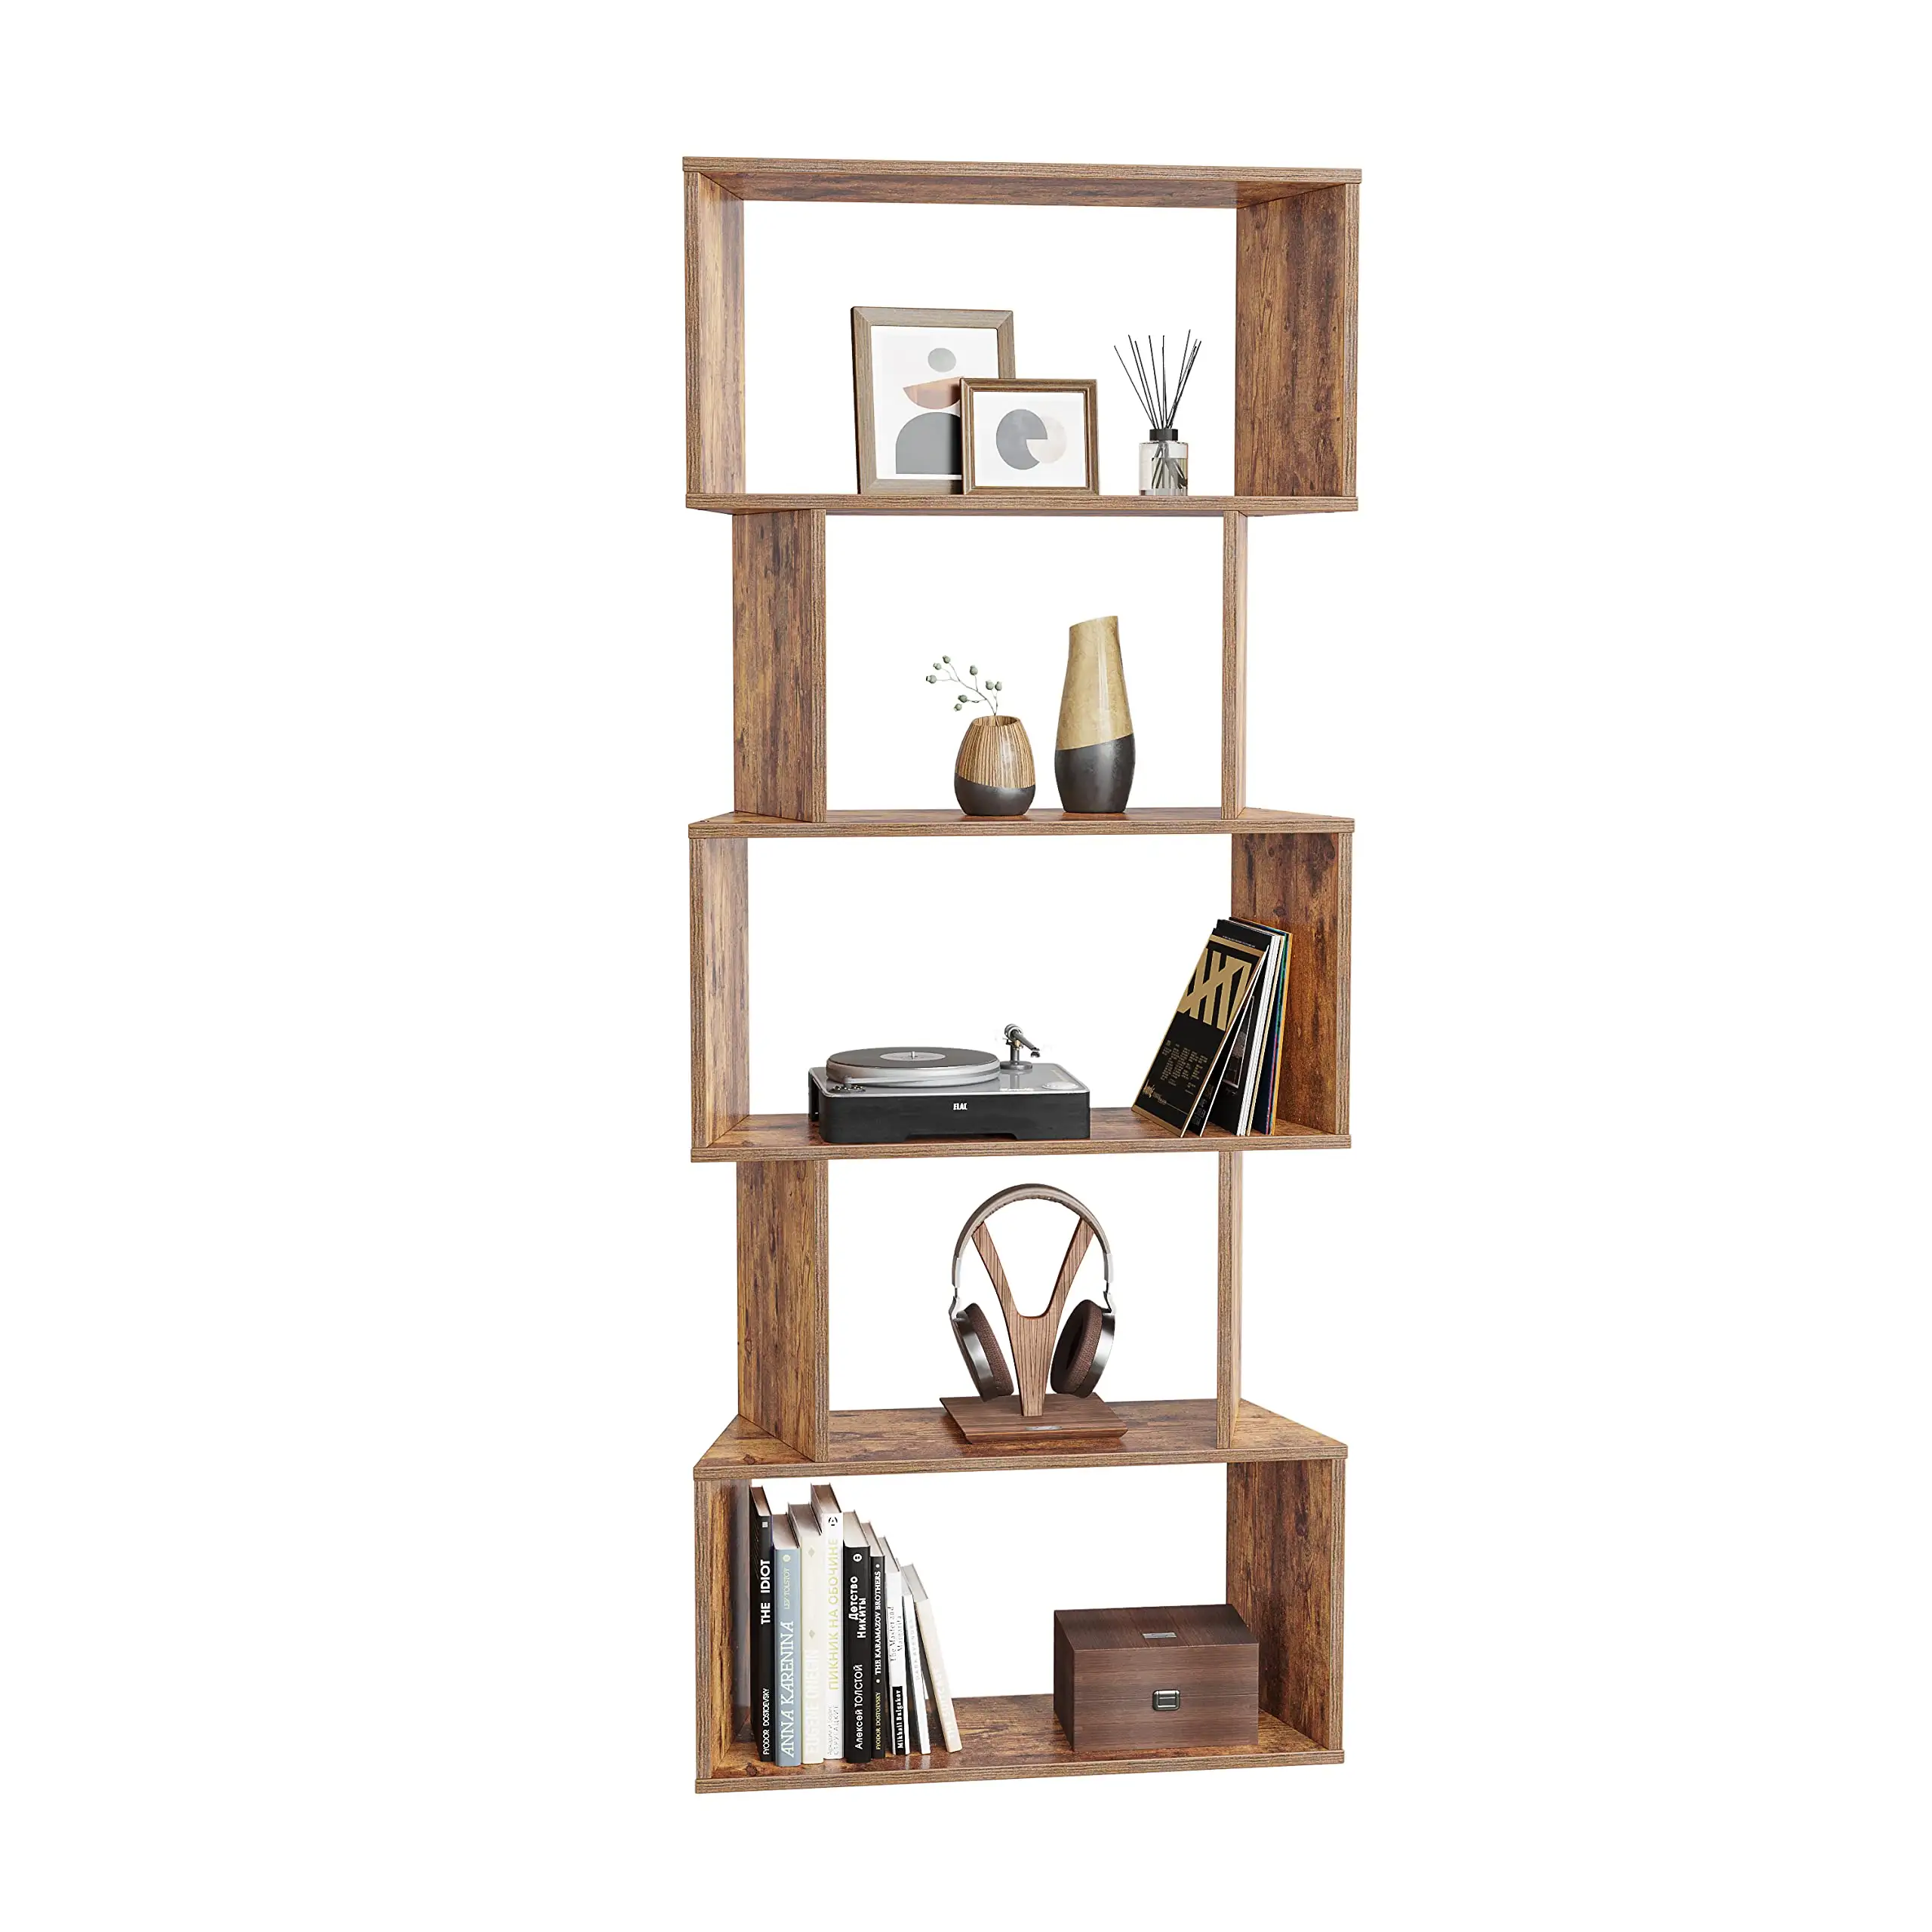 5 Tier Bookcase, Bookshelf with Storage and Display Cabinet, Open Book Shelf for Office, Living Room, Bedroom, White